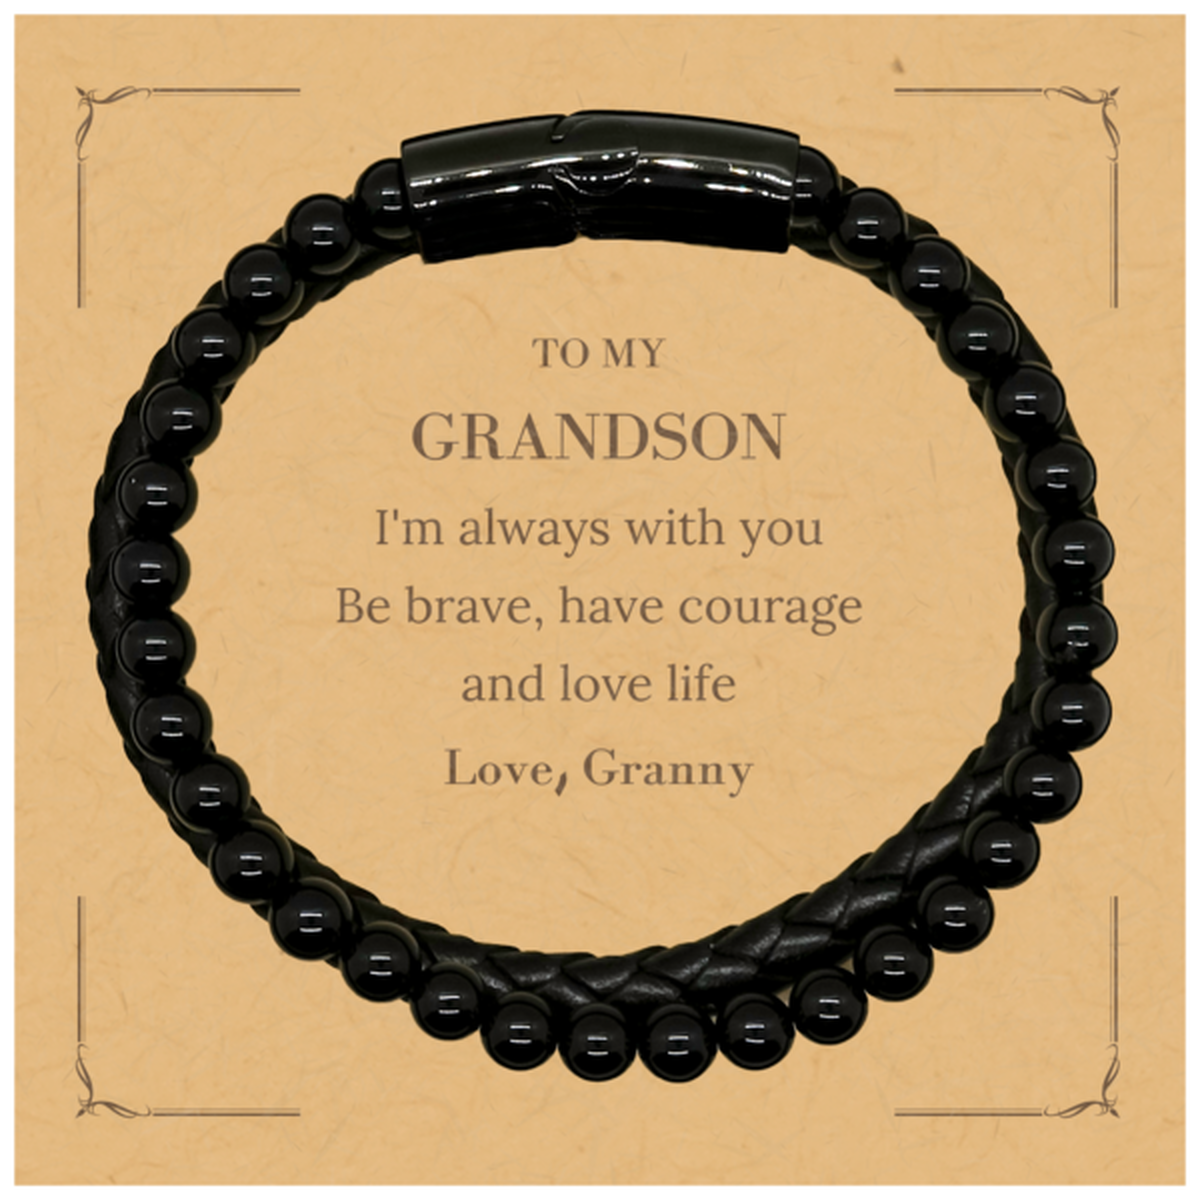 To My Grandson Gifts from Granny, Unique Stone Leather Bracelets Inspirational Christmas Birthday Graduation Gifts for Grandson I'm always with you. Be brave, have courage and love life. Love, Granny